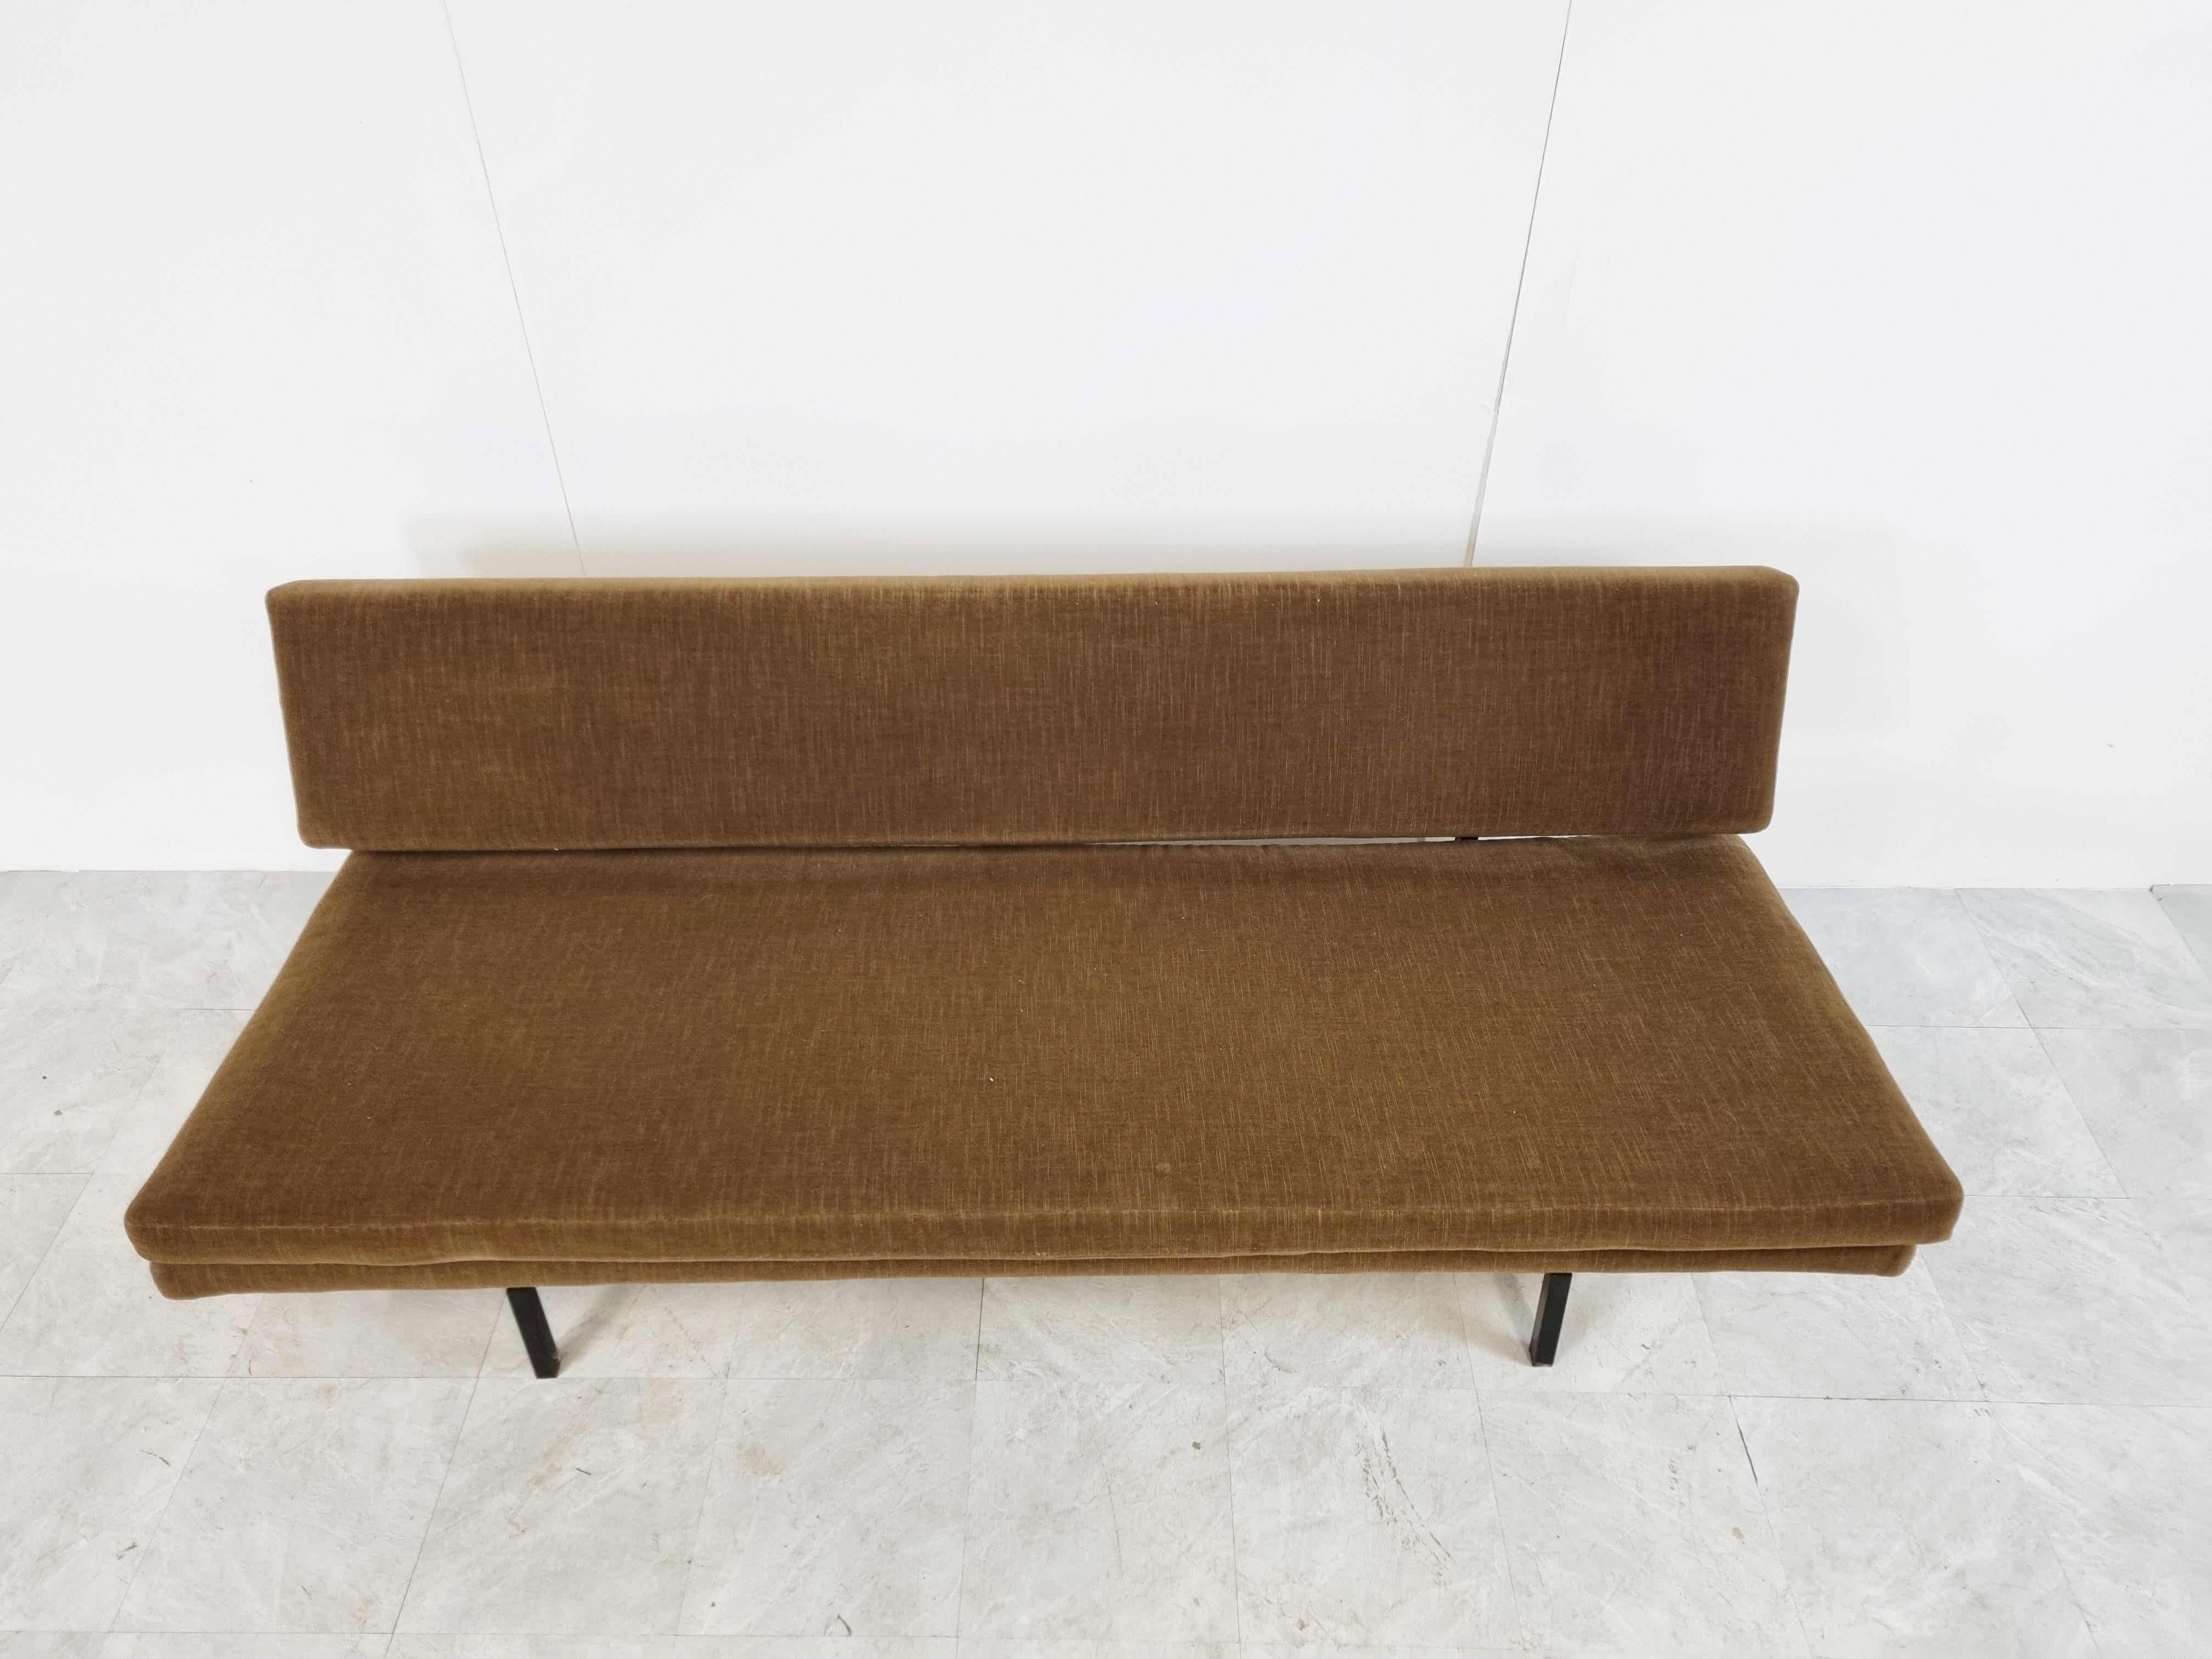 Beautiful minimalist design daybed by Martin Visser for 'T Spectrum

This saybed has the original upholstery and dates from the '60s or '70s

Elegant mid century piece.

1960s - Netherlands

Very good condition

Dimensions:
Height: